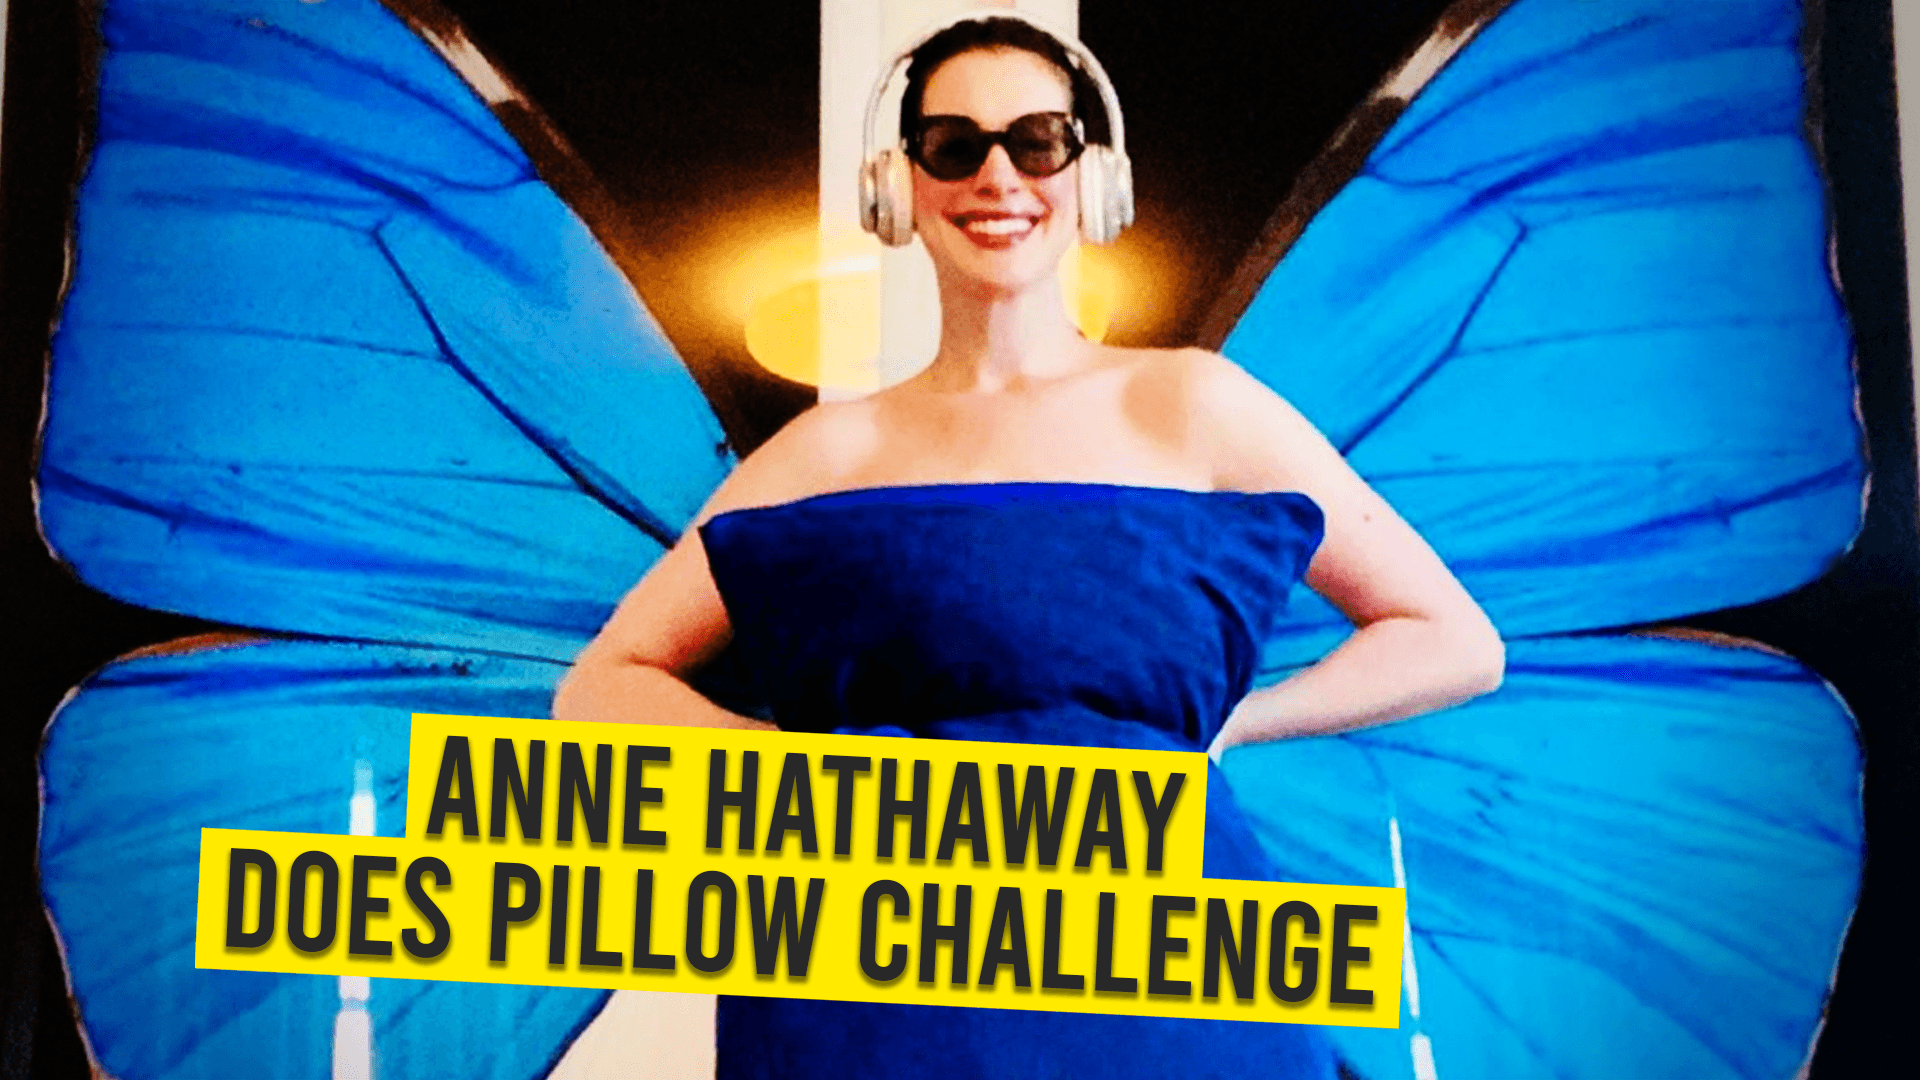 Anne Hathaway Does Pillow Challenge